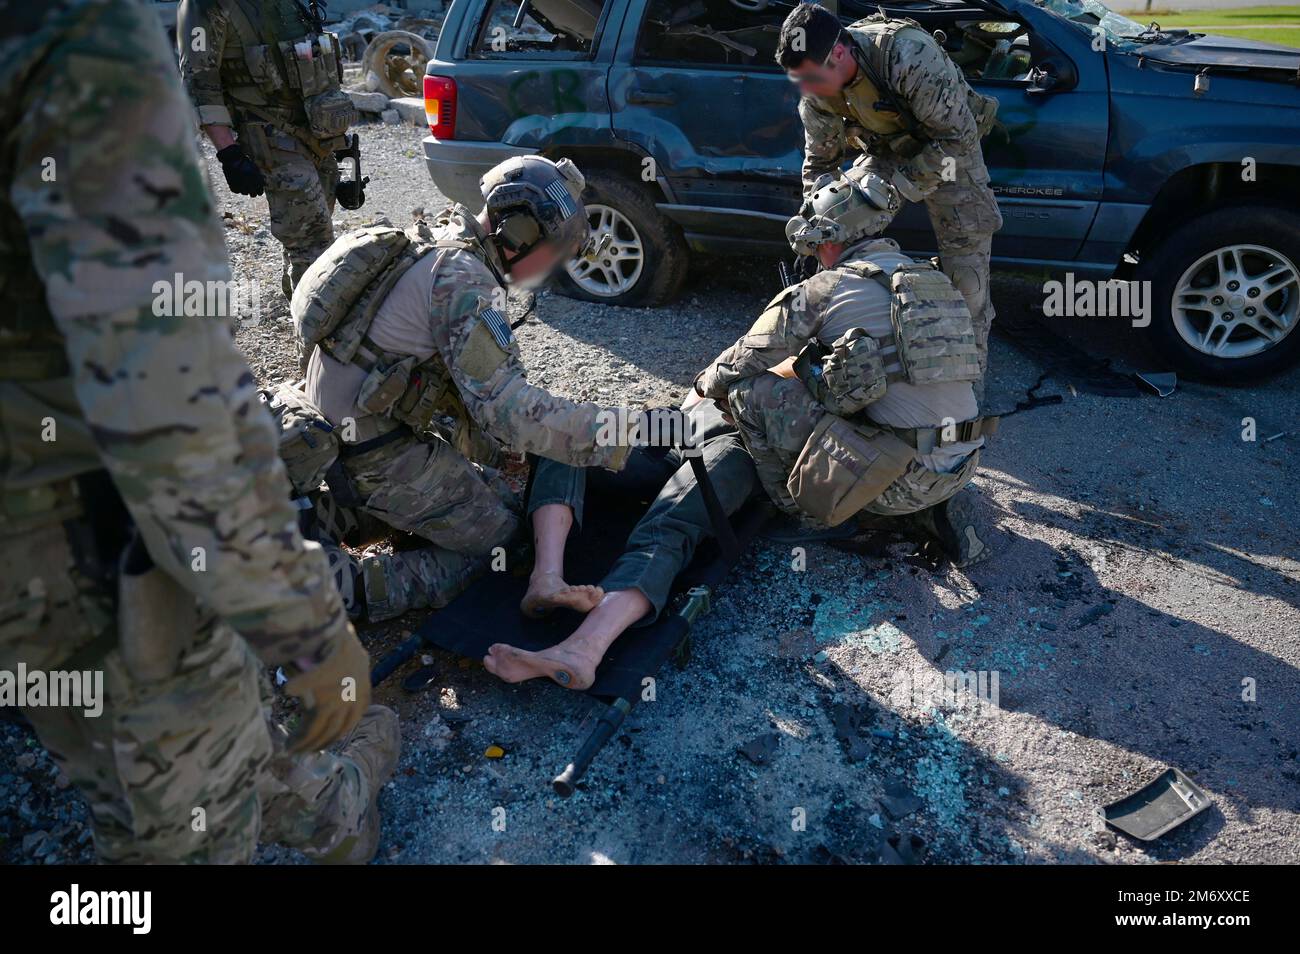 U.S. Air Force Special Tactics operators with the 24th Special Operations Wing, Hurlburt Field, Florida, treat a simulated wounded civilian after extricating them from a crushed vehicle during Emerald Warrior 22.1 at the Guardian Center, Georgia, May 10, 2022. Emerald Warrior provides annual, realistic pre-deployment training encompassing multiple joint operating areas. The exercise prepares special operations forces, conventional force enablers, partner nations and interagency elements, to integrate with and execute full-spectrum special operations in an arctic climate, sharpening U.S. forces Stock Photo